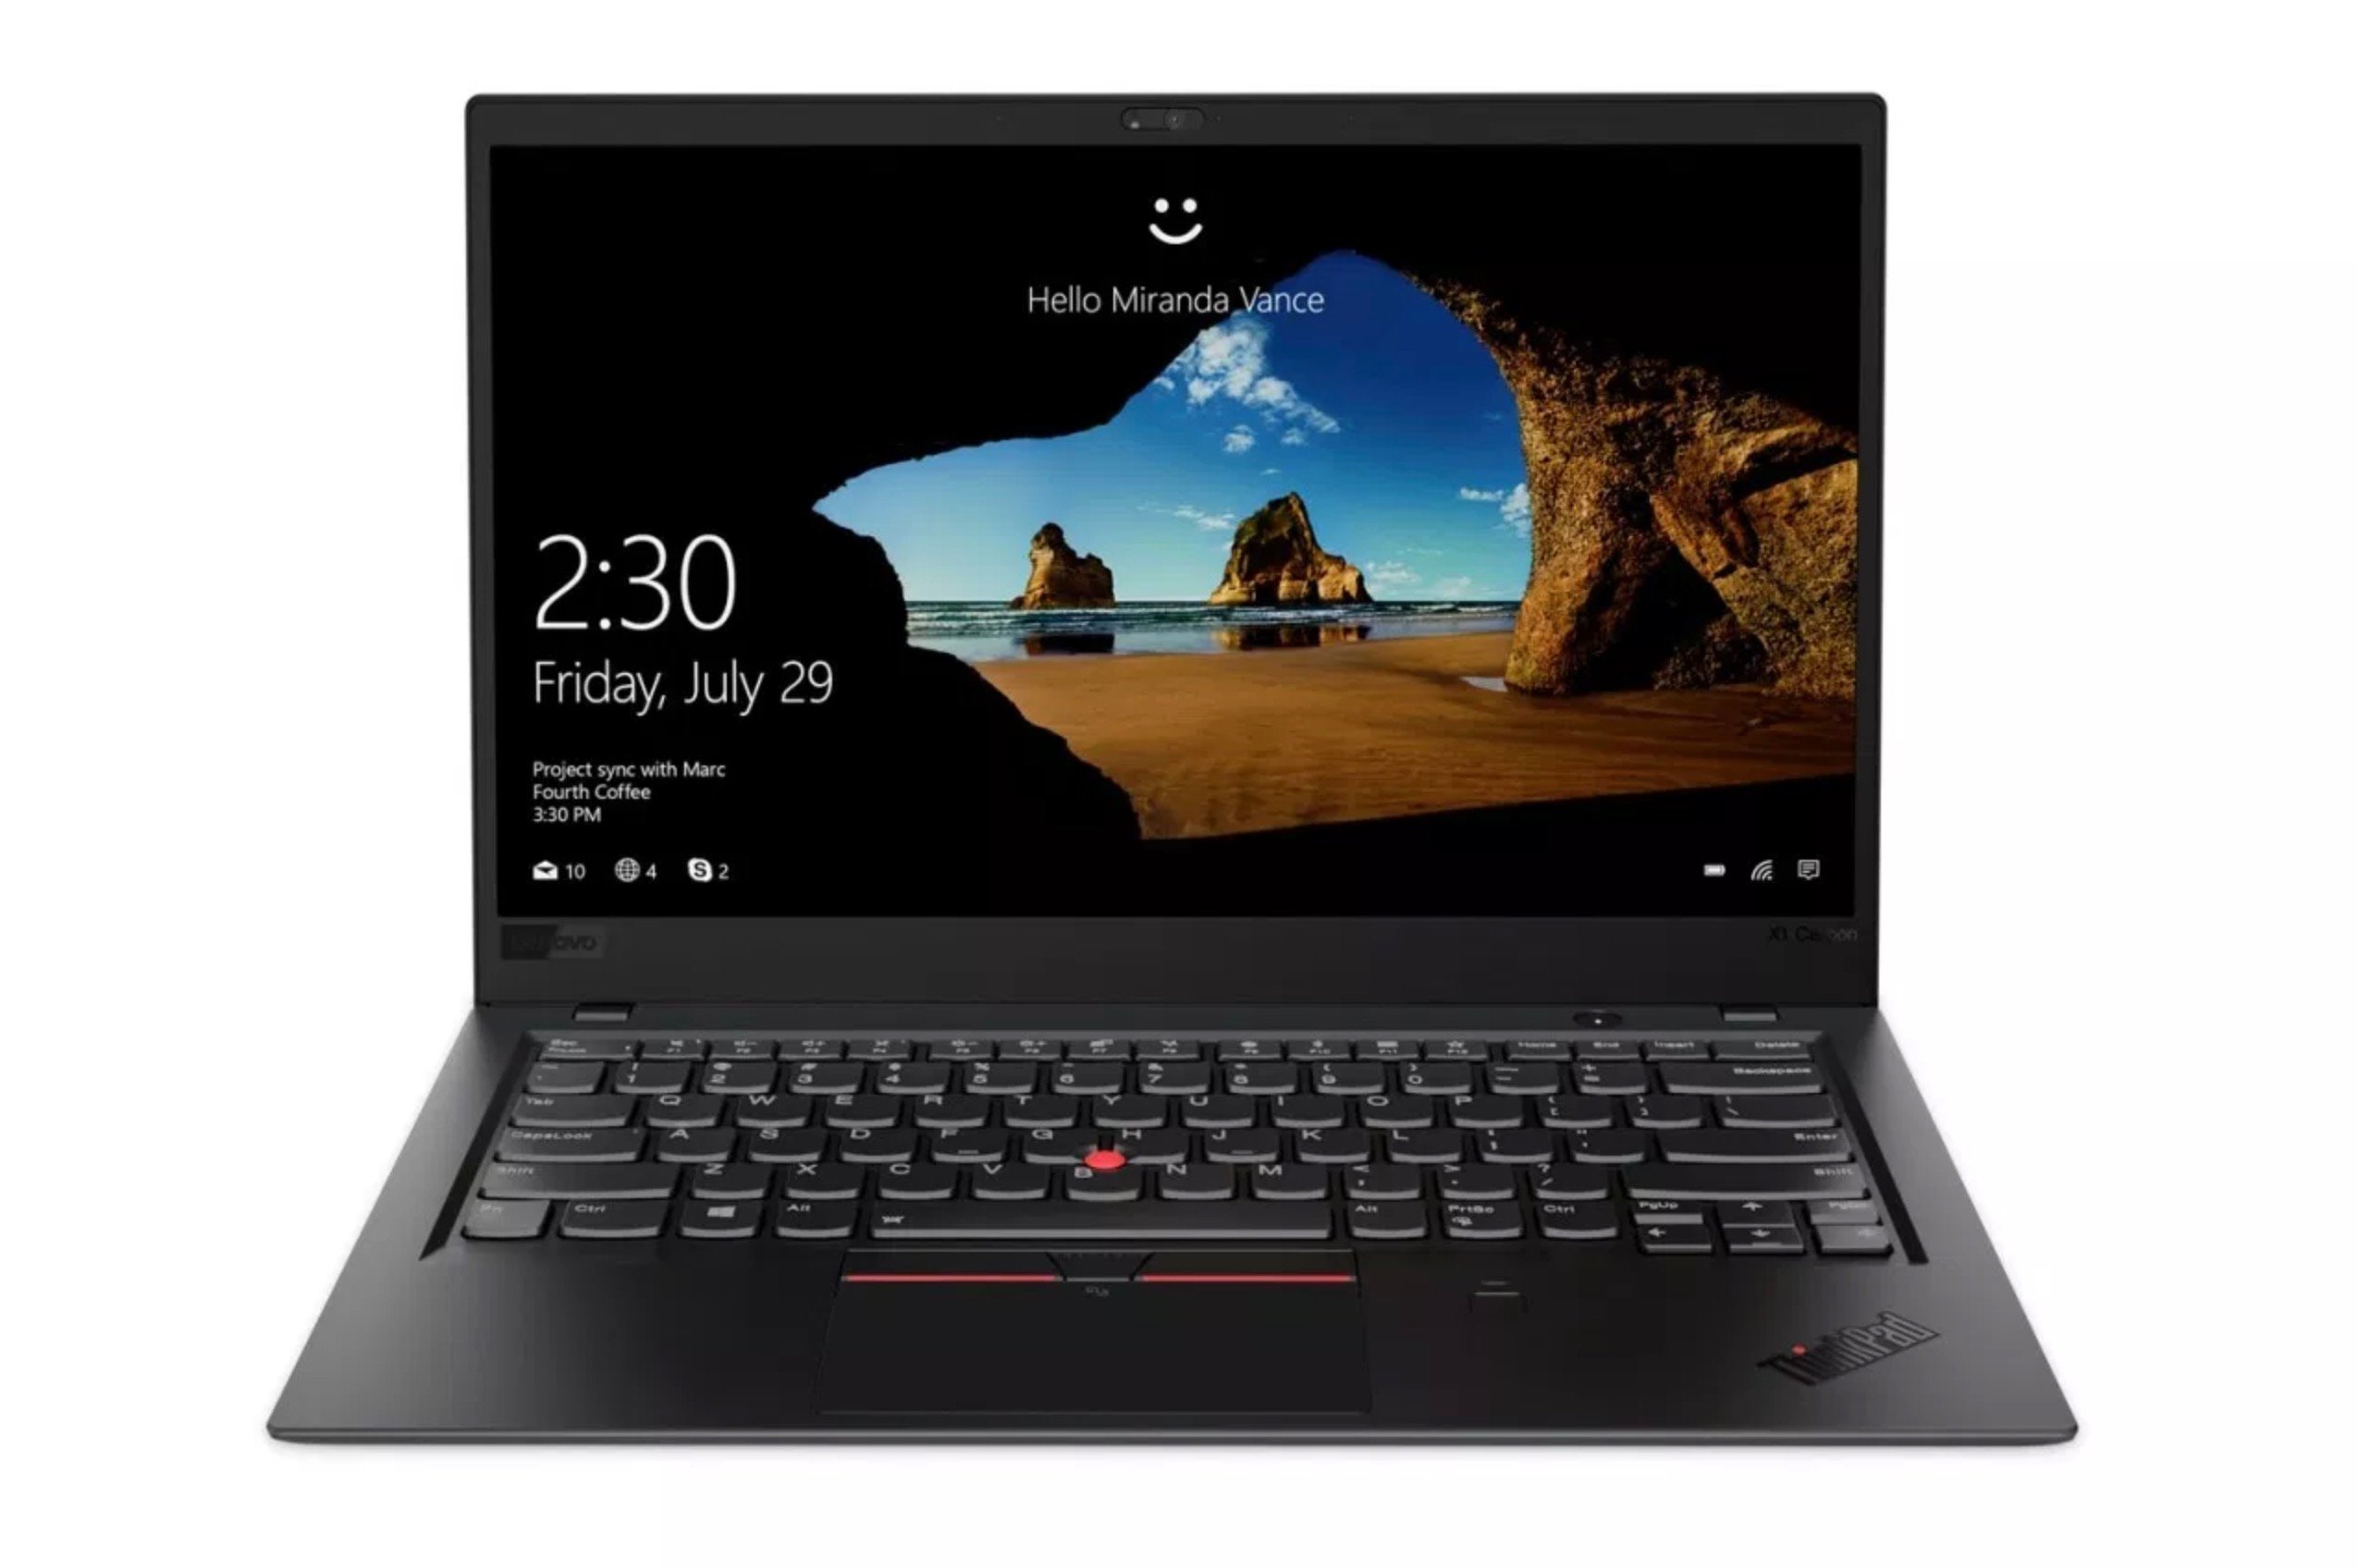 If you type a lot, the ThinkPad X1 Carbon is the best MacBook Pro alternative you can buy.